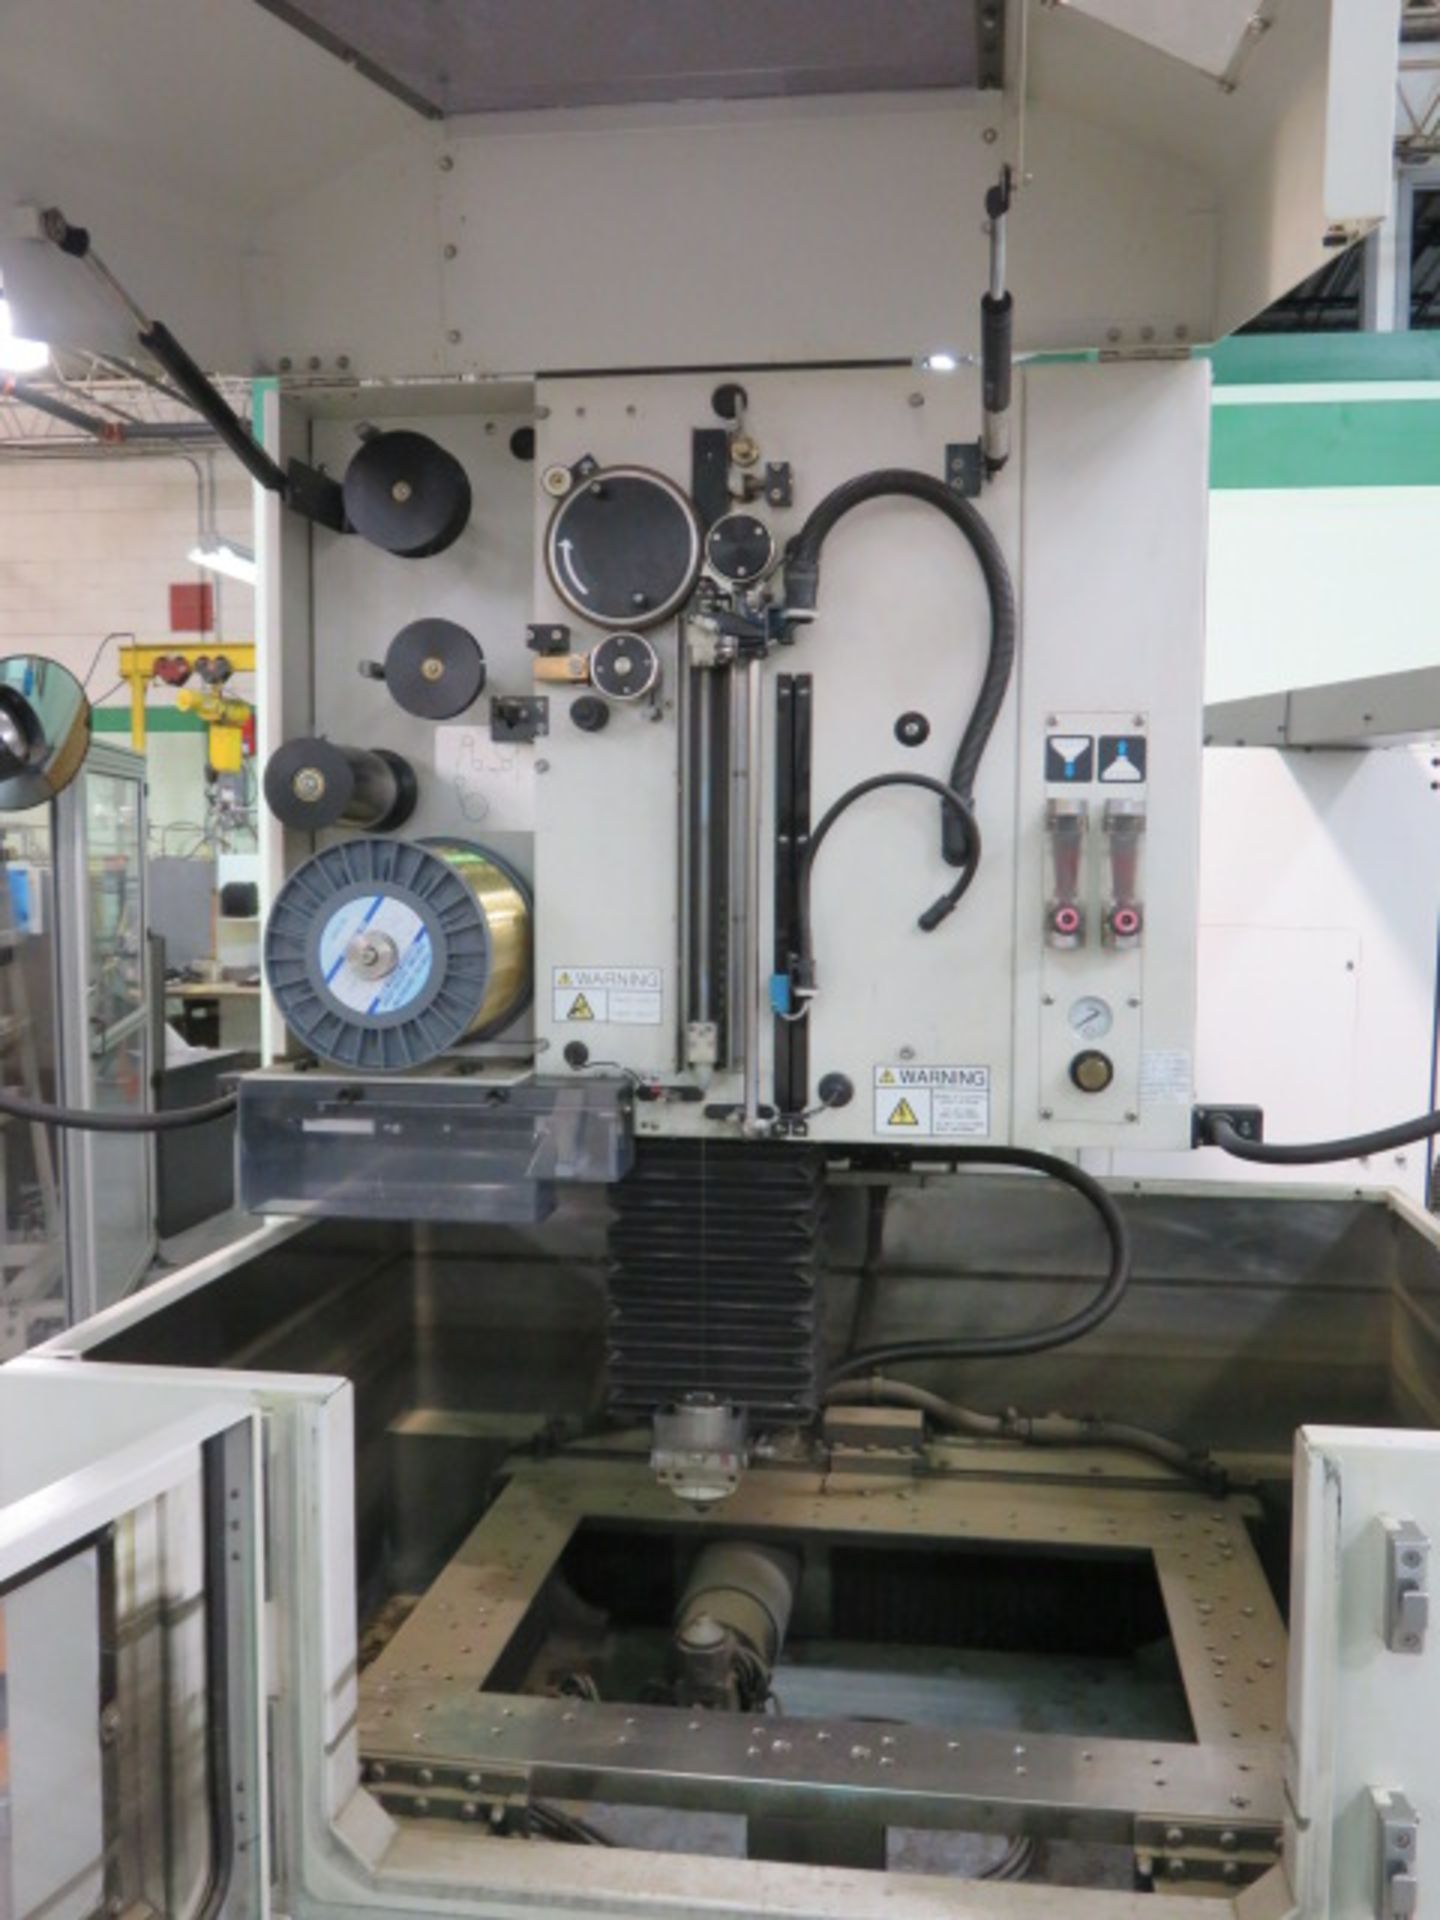 Fanuc 4-Axis CNC Wire EDM Machine Model Robocut AX-1iC, S/N P051C1572 (2005), 43 in. x 33 in. x 21 i - Image 2 of 5